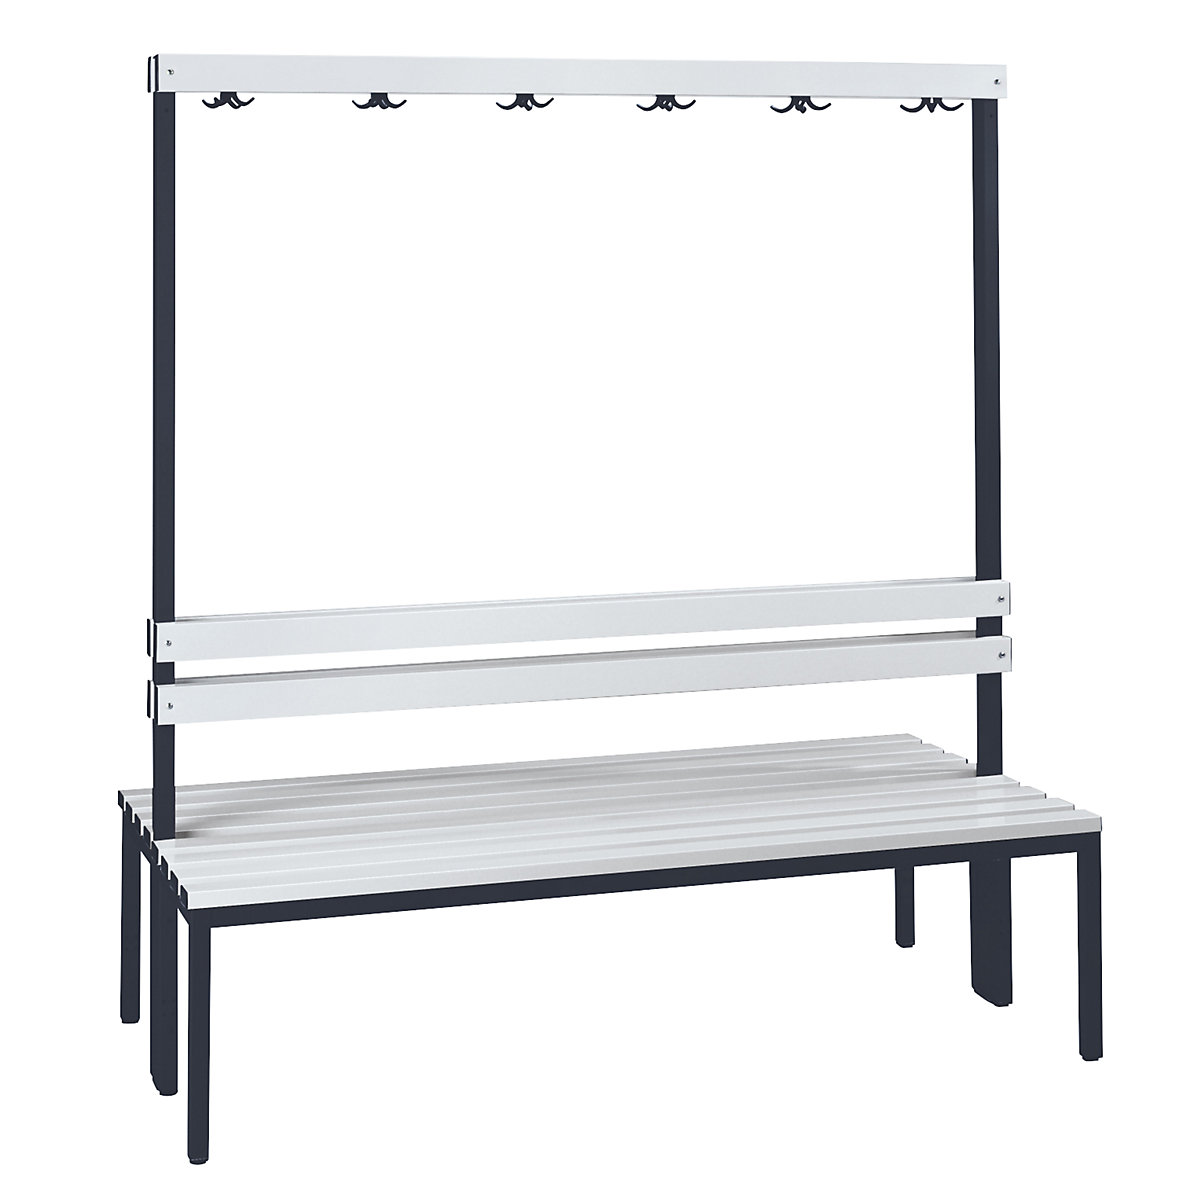 Wolf – Cloakroom bench, double sided, length 1500 mm, PVC slat, 2x 6 double-prong hooks, grey